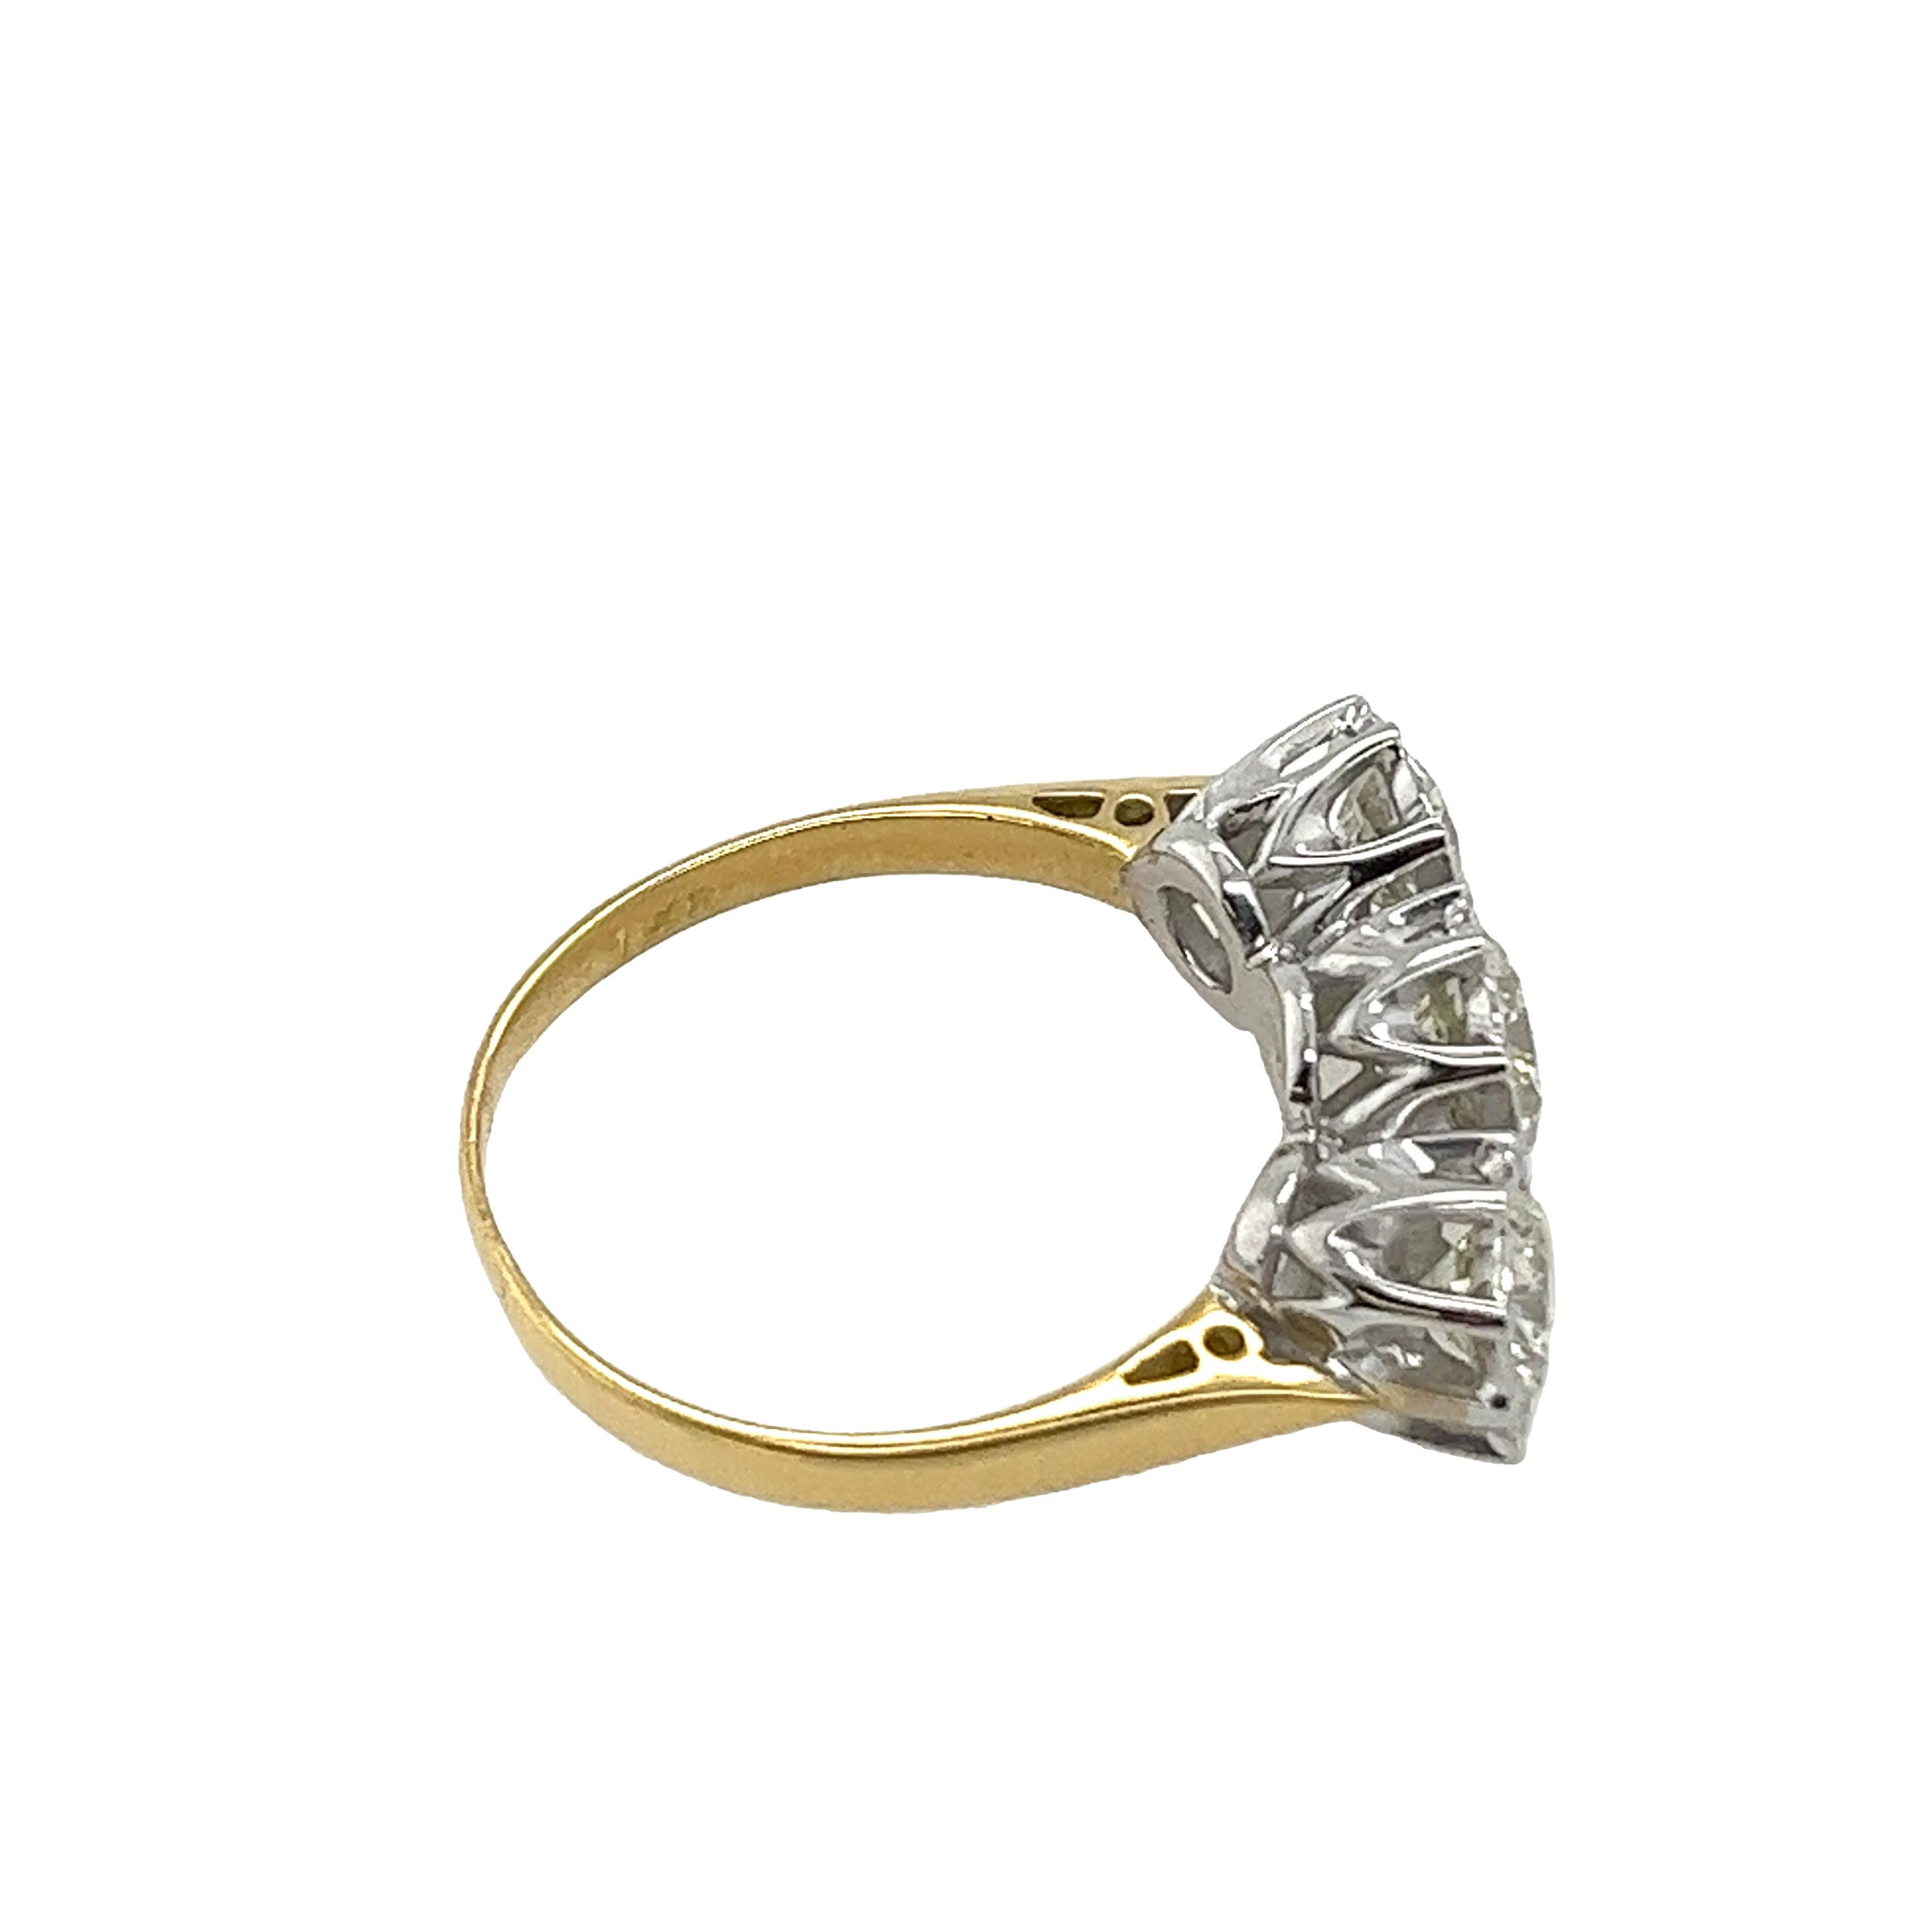 Round Cut 18ct Yellow & White Gold 3 Stone Diamond Ring, Set With 1.46ct Natural Diamonds For Sale